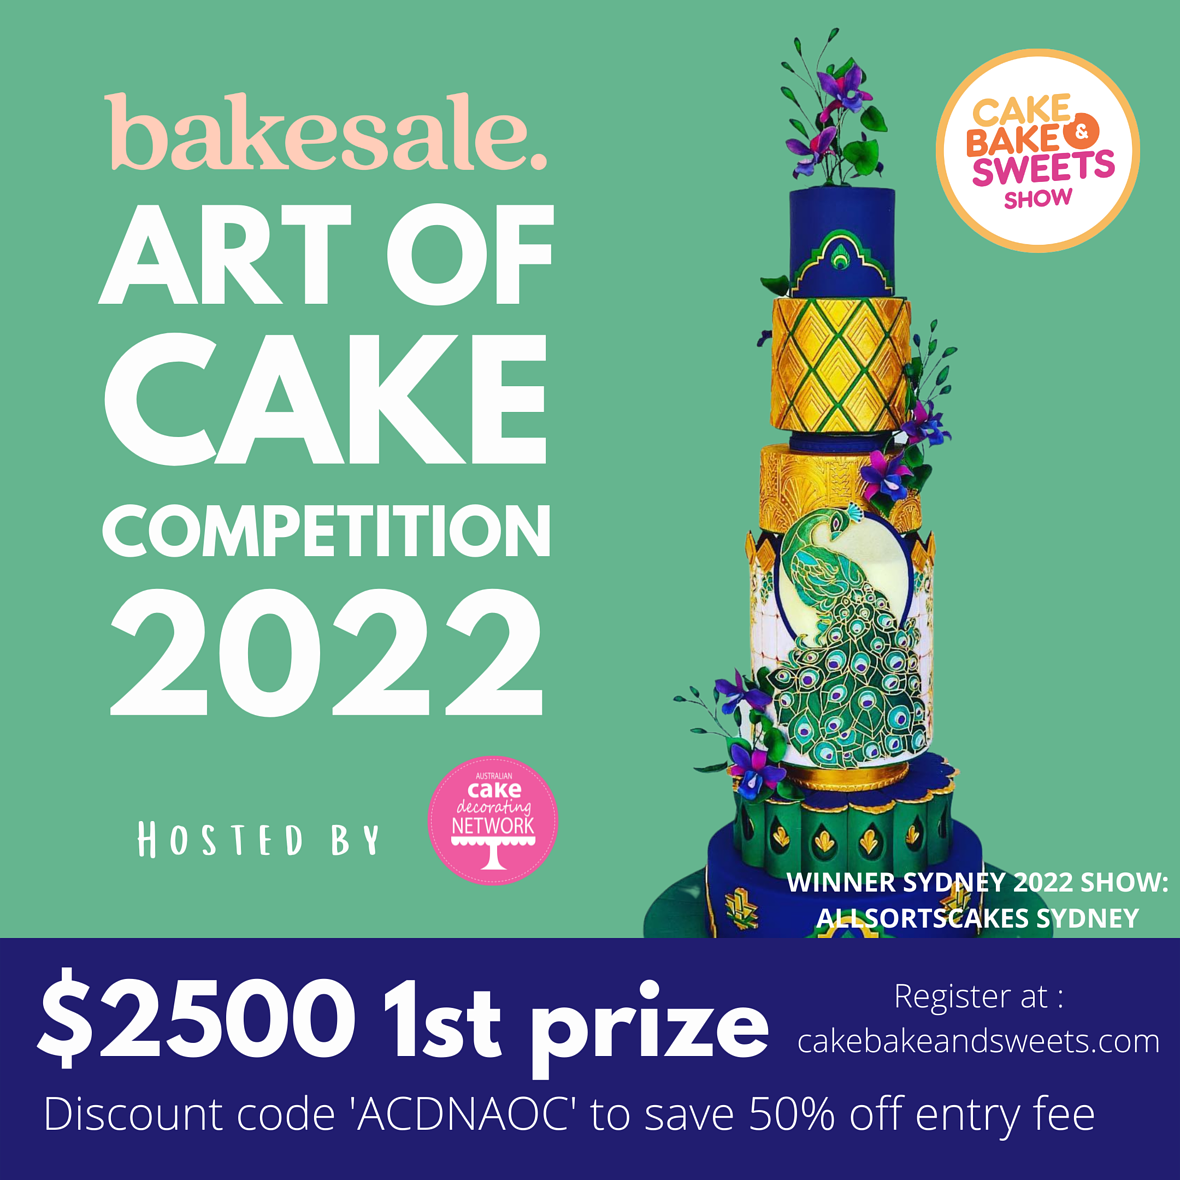 Bangalore cake show 2022: Location, Timings, Date, Entry Fee